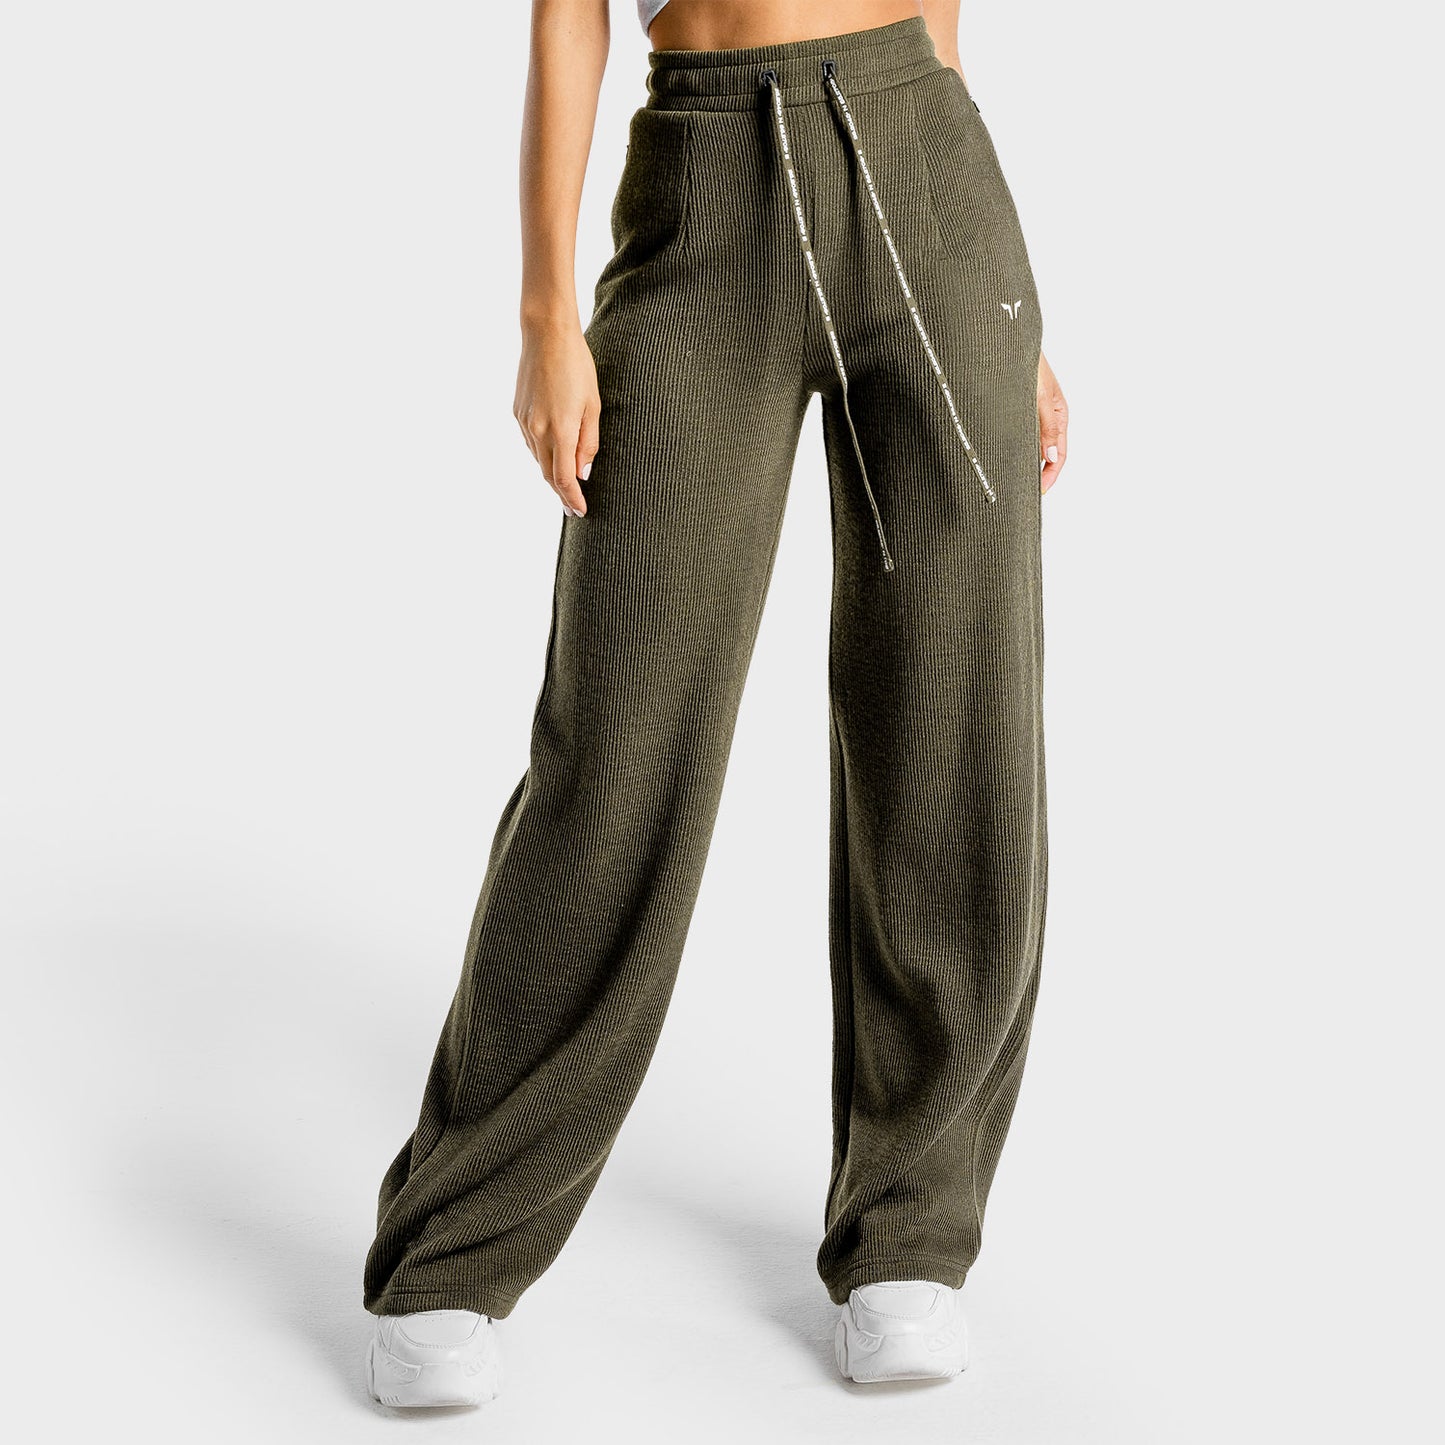 Wide leg yoga pants are back and better than ever  WellGood